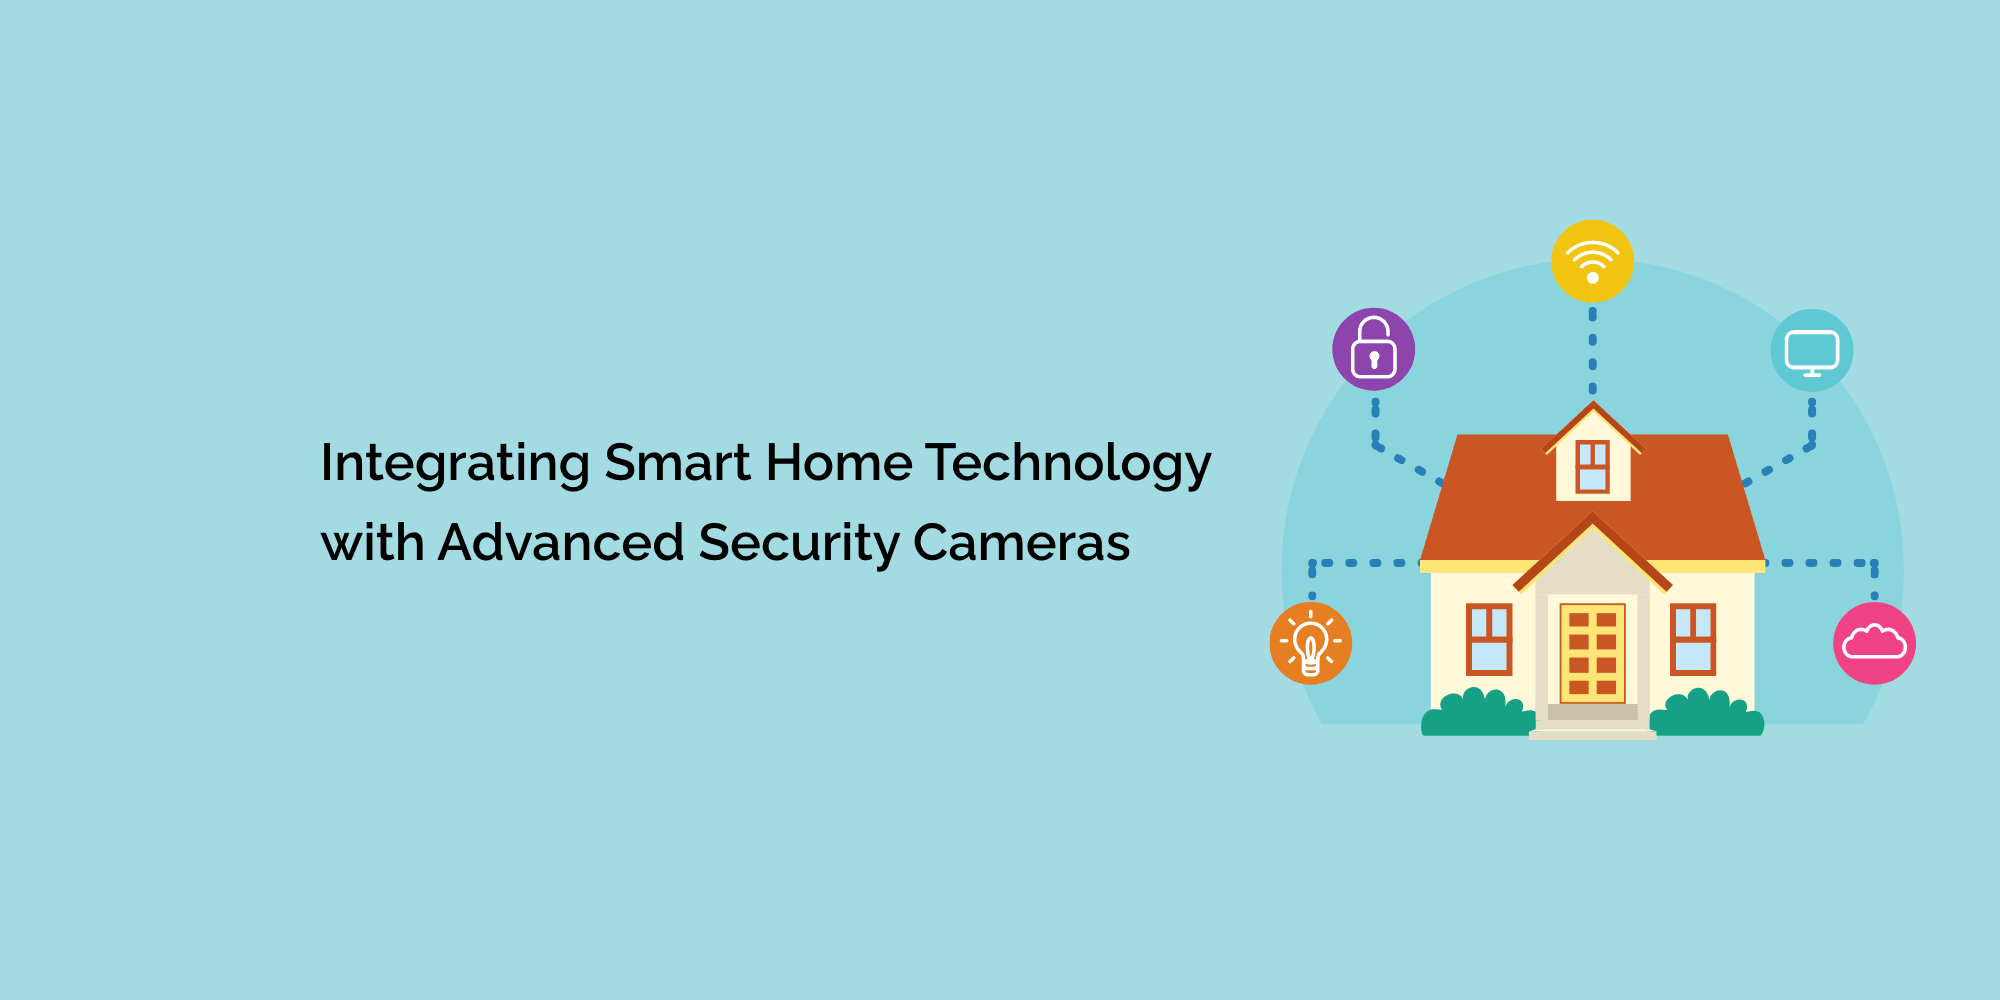 Integrating Smart Home Technology with Advanced Security Cameras